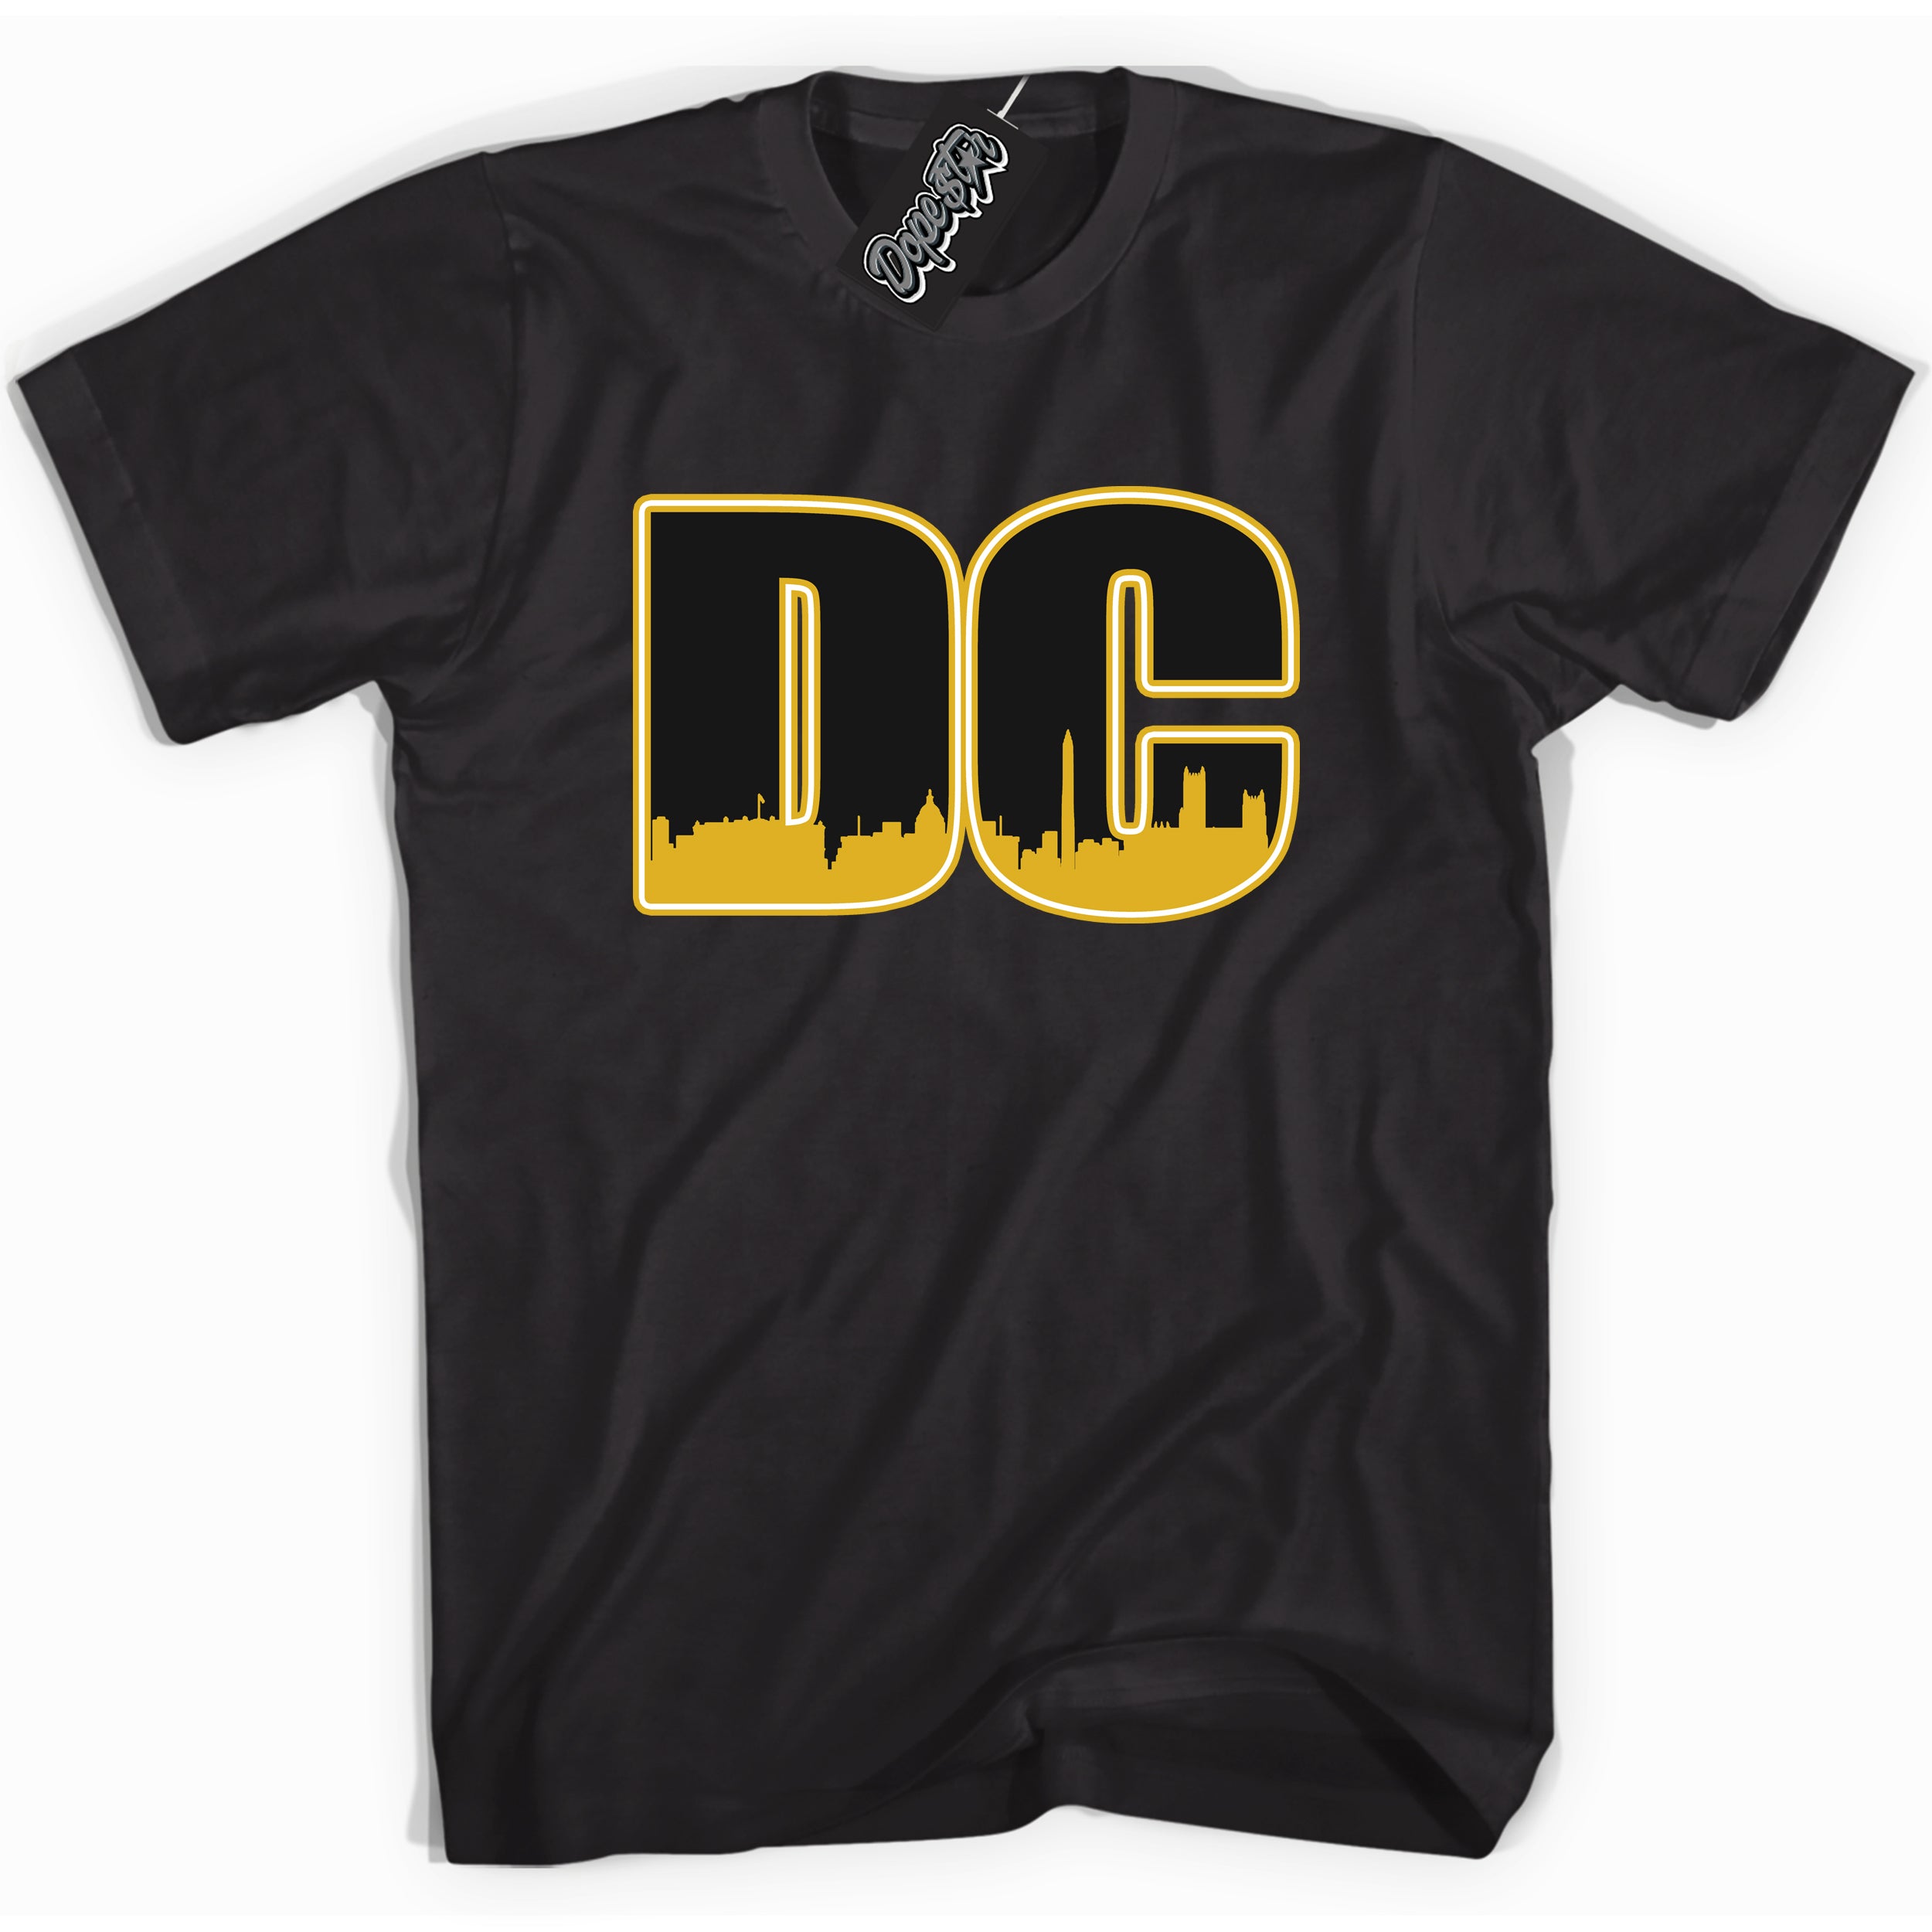 Cool Black Shirt with “ DC” design that perfectly matches Yellow Ochre 6s Sneakers.